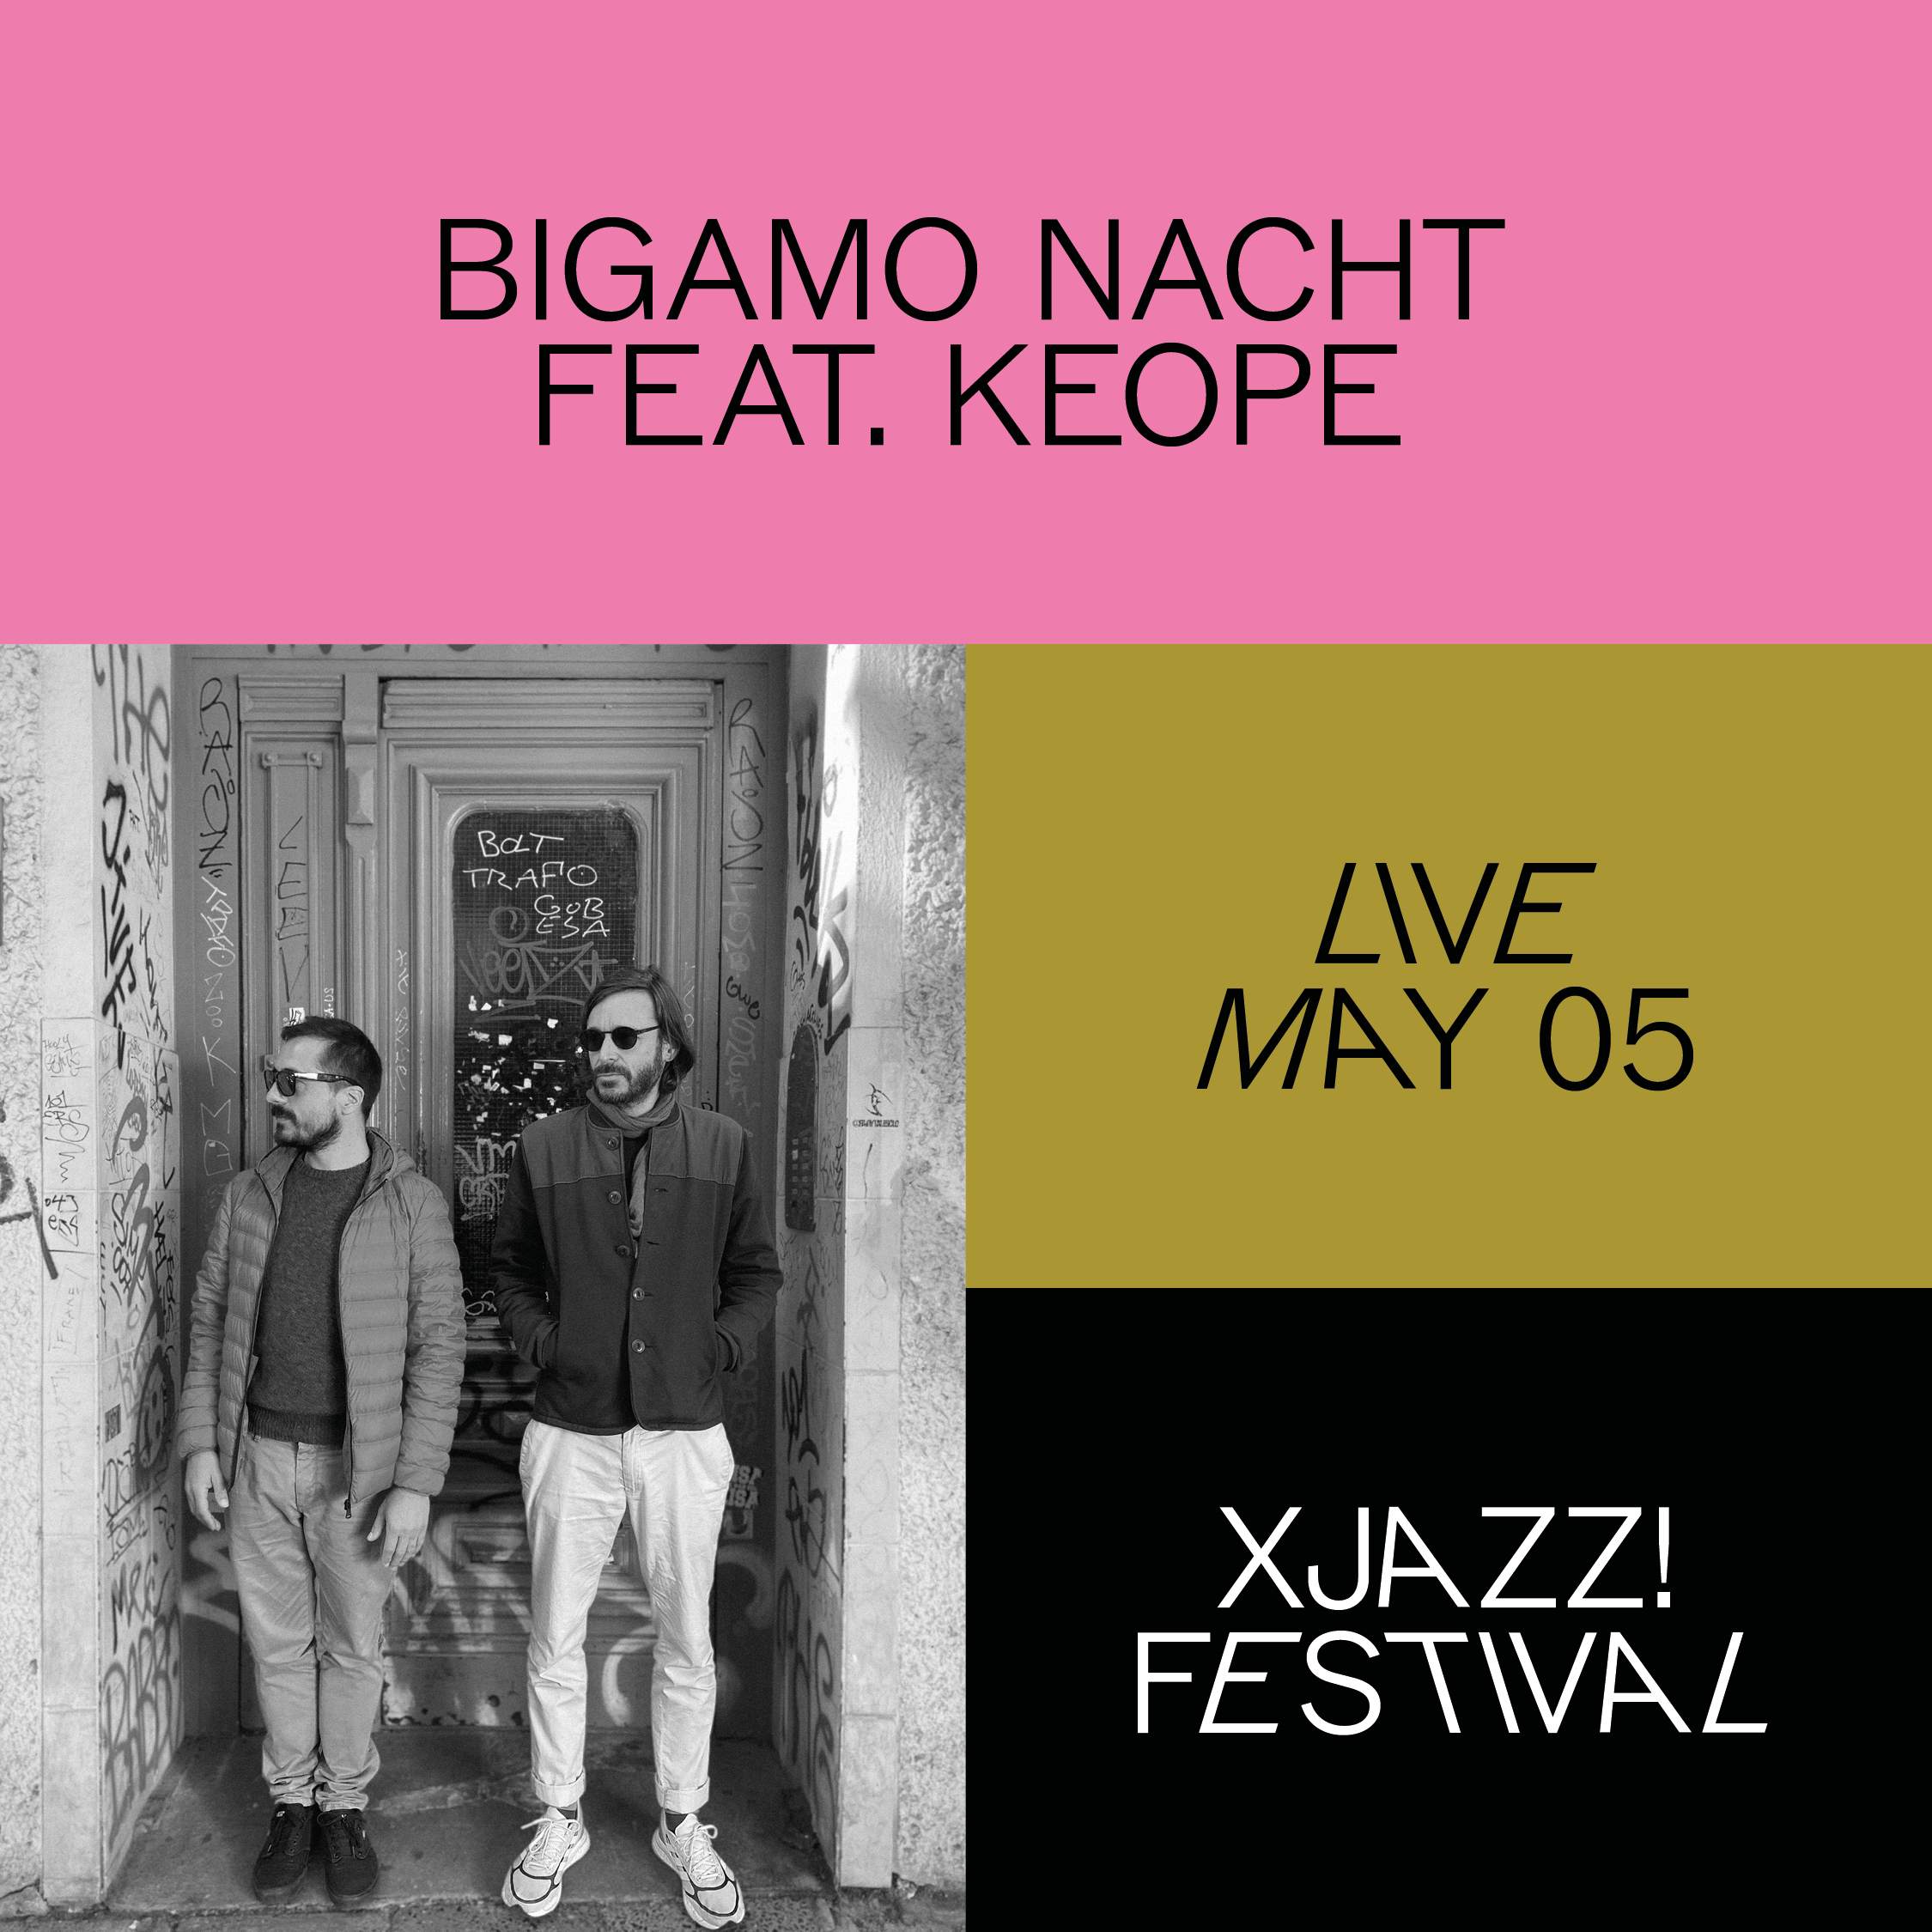 Bigamo Nacht feat. Keope, Al Pagoda & Special Guests - フライヤー表